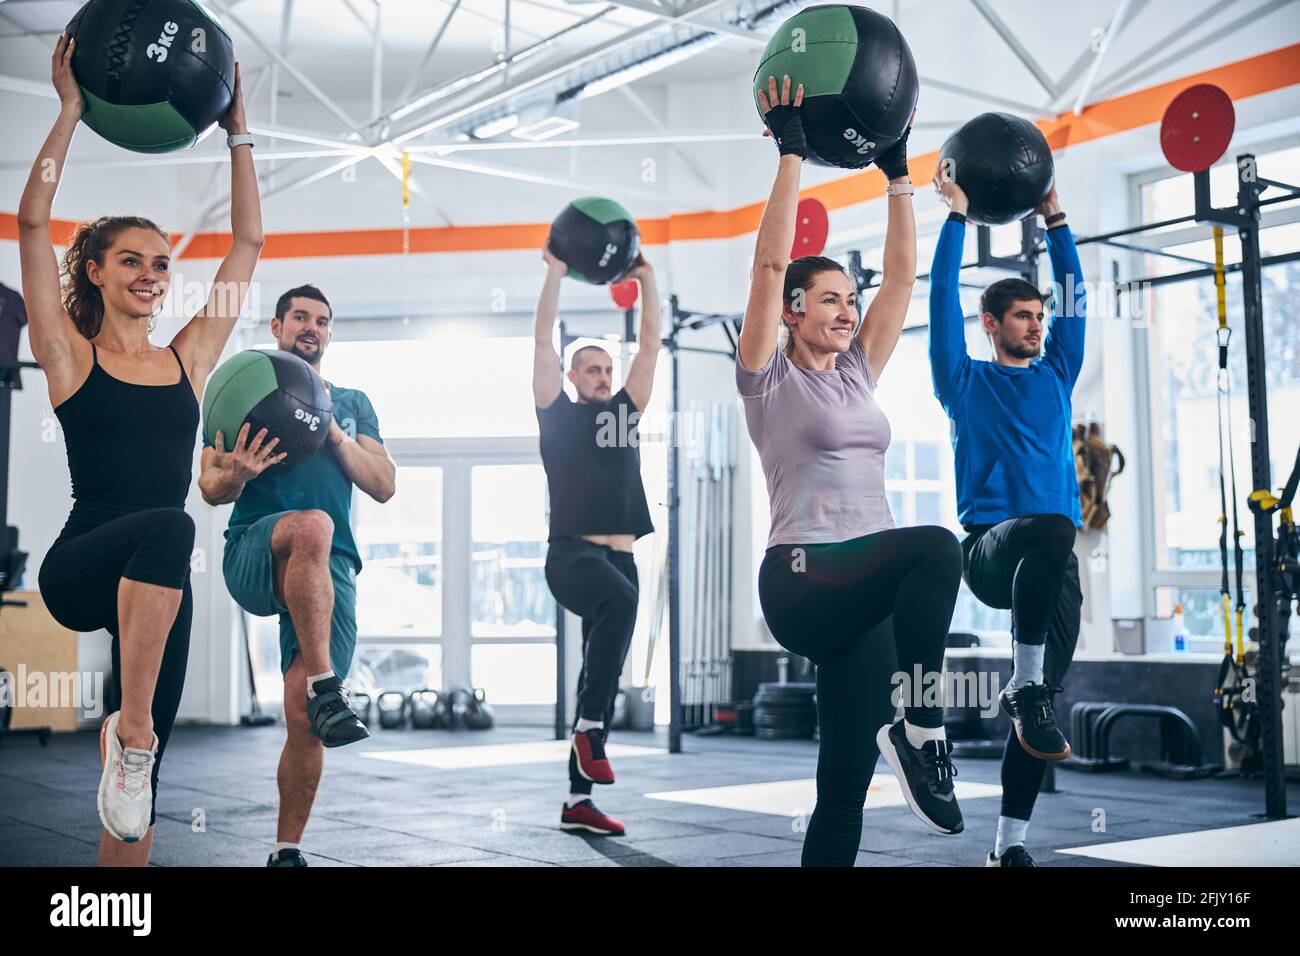 Well-built Caucasian men and women working out together Stock Photo